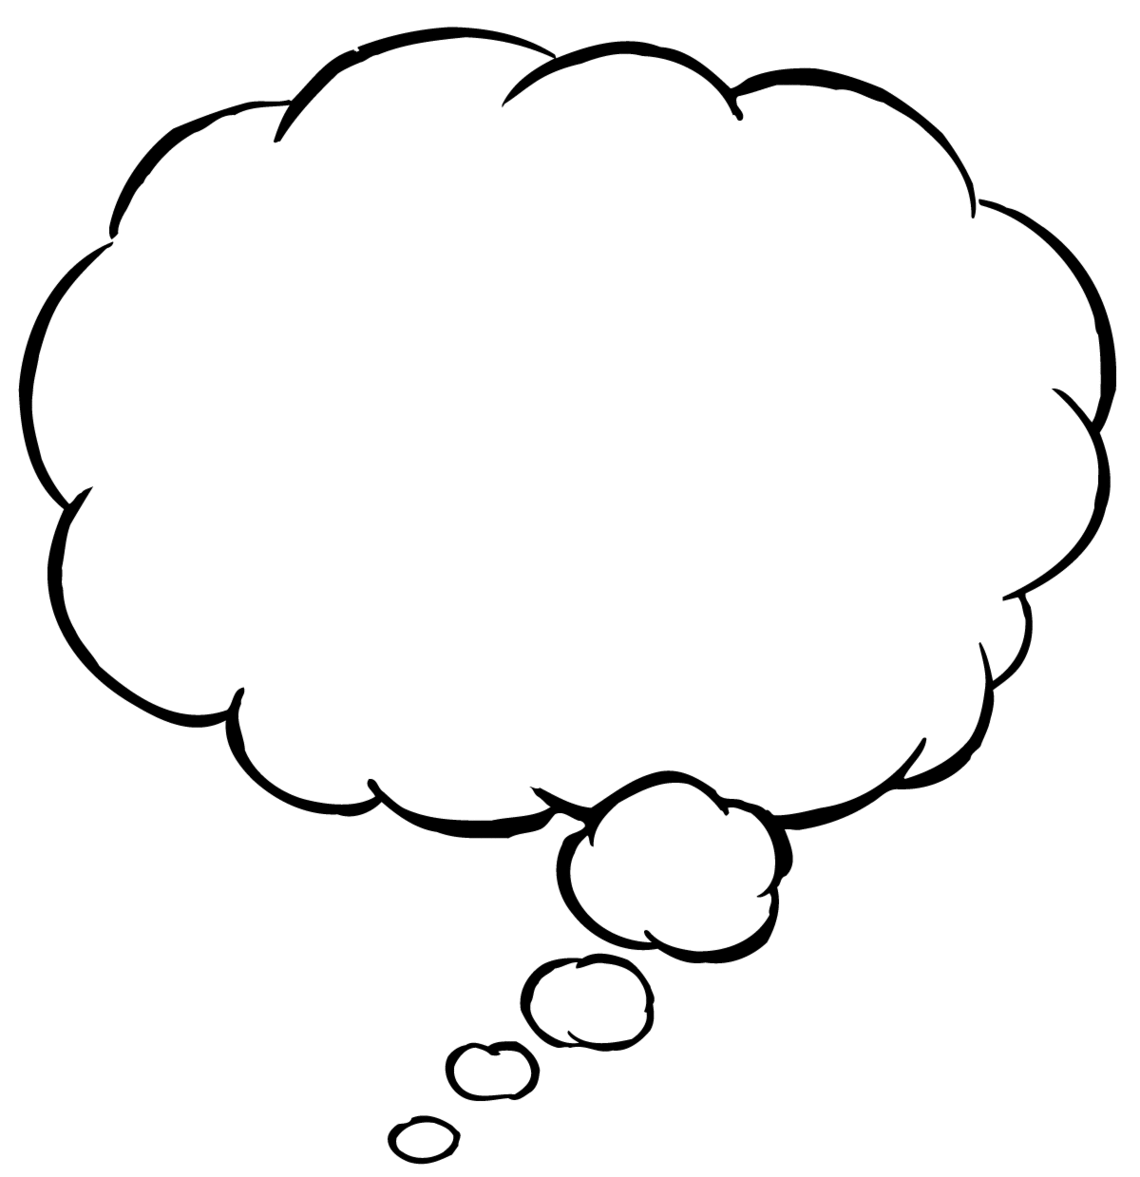 Thought Bubble Image Clipart - Free to use Clip Art Resource